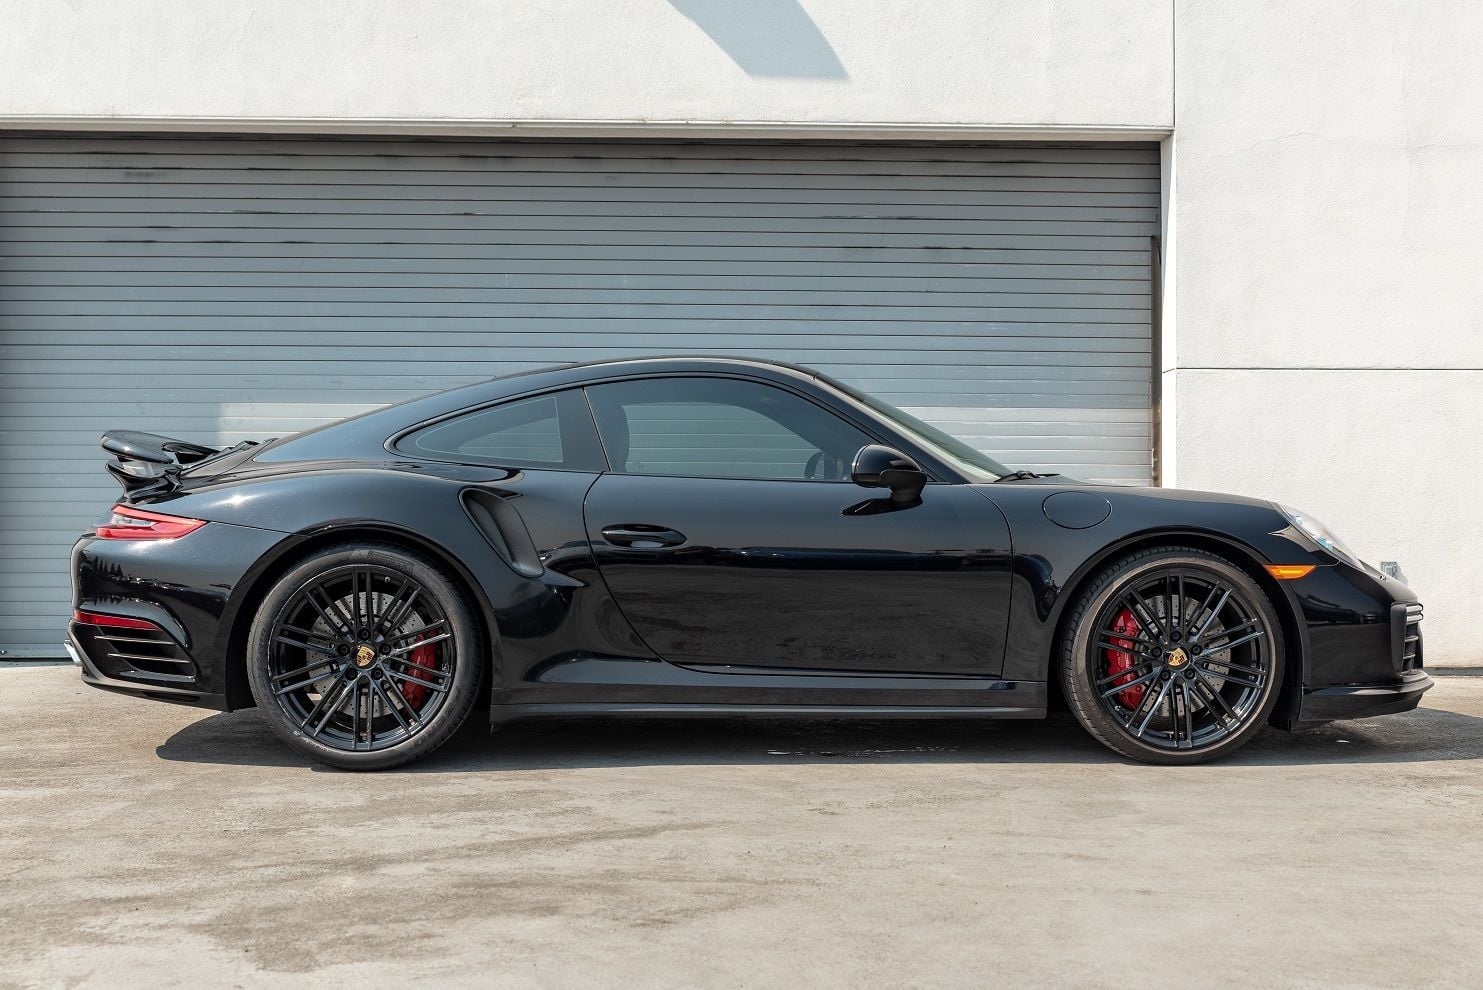 2017 Porsche 911 - Certified 2017 Porsche 911 Turbo Coupe - Used - VIN WP0AD2A9XHS166074 - 8,149 Miles - 6 cyl - AWD - Automatic - Coupe - Black - Fresno, CA 93650, United States